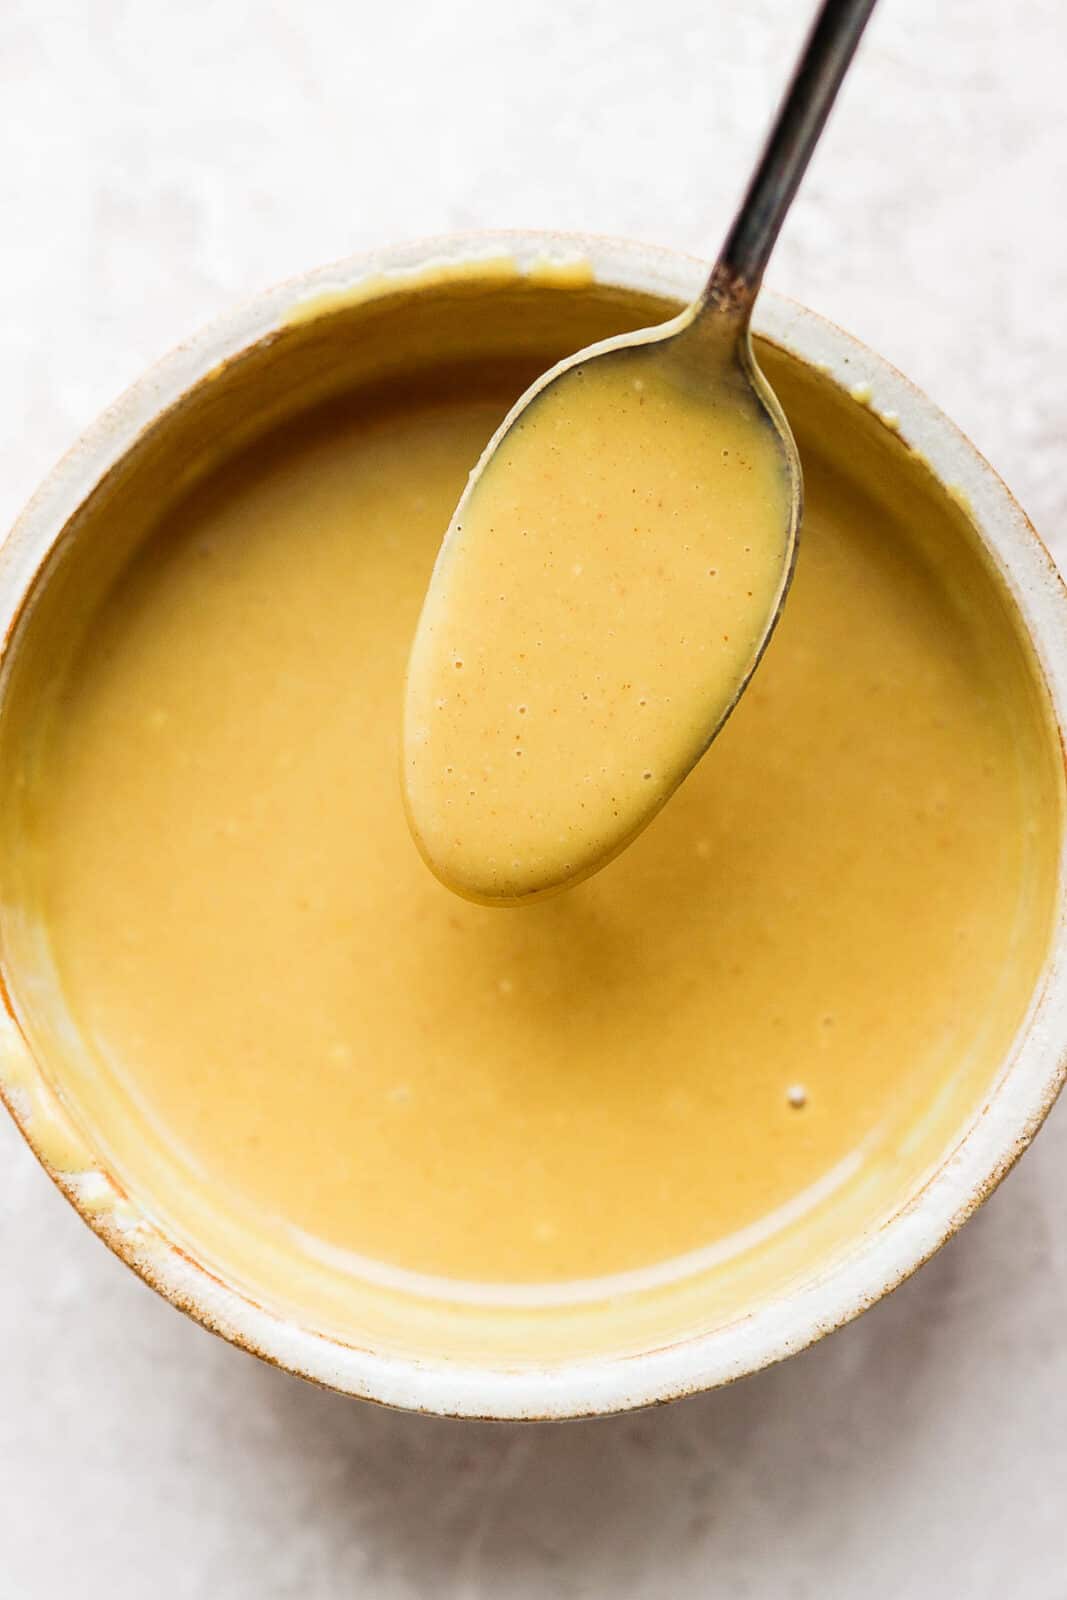 A spoon scooping some of the honey mustard.